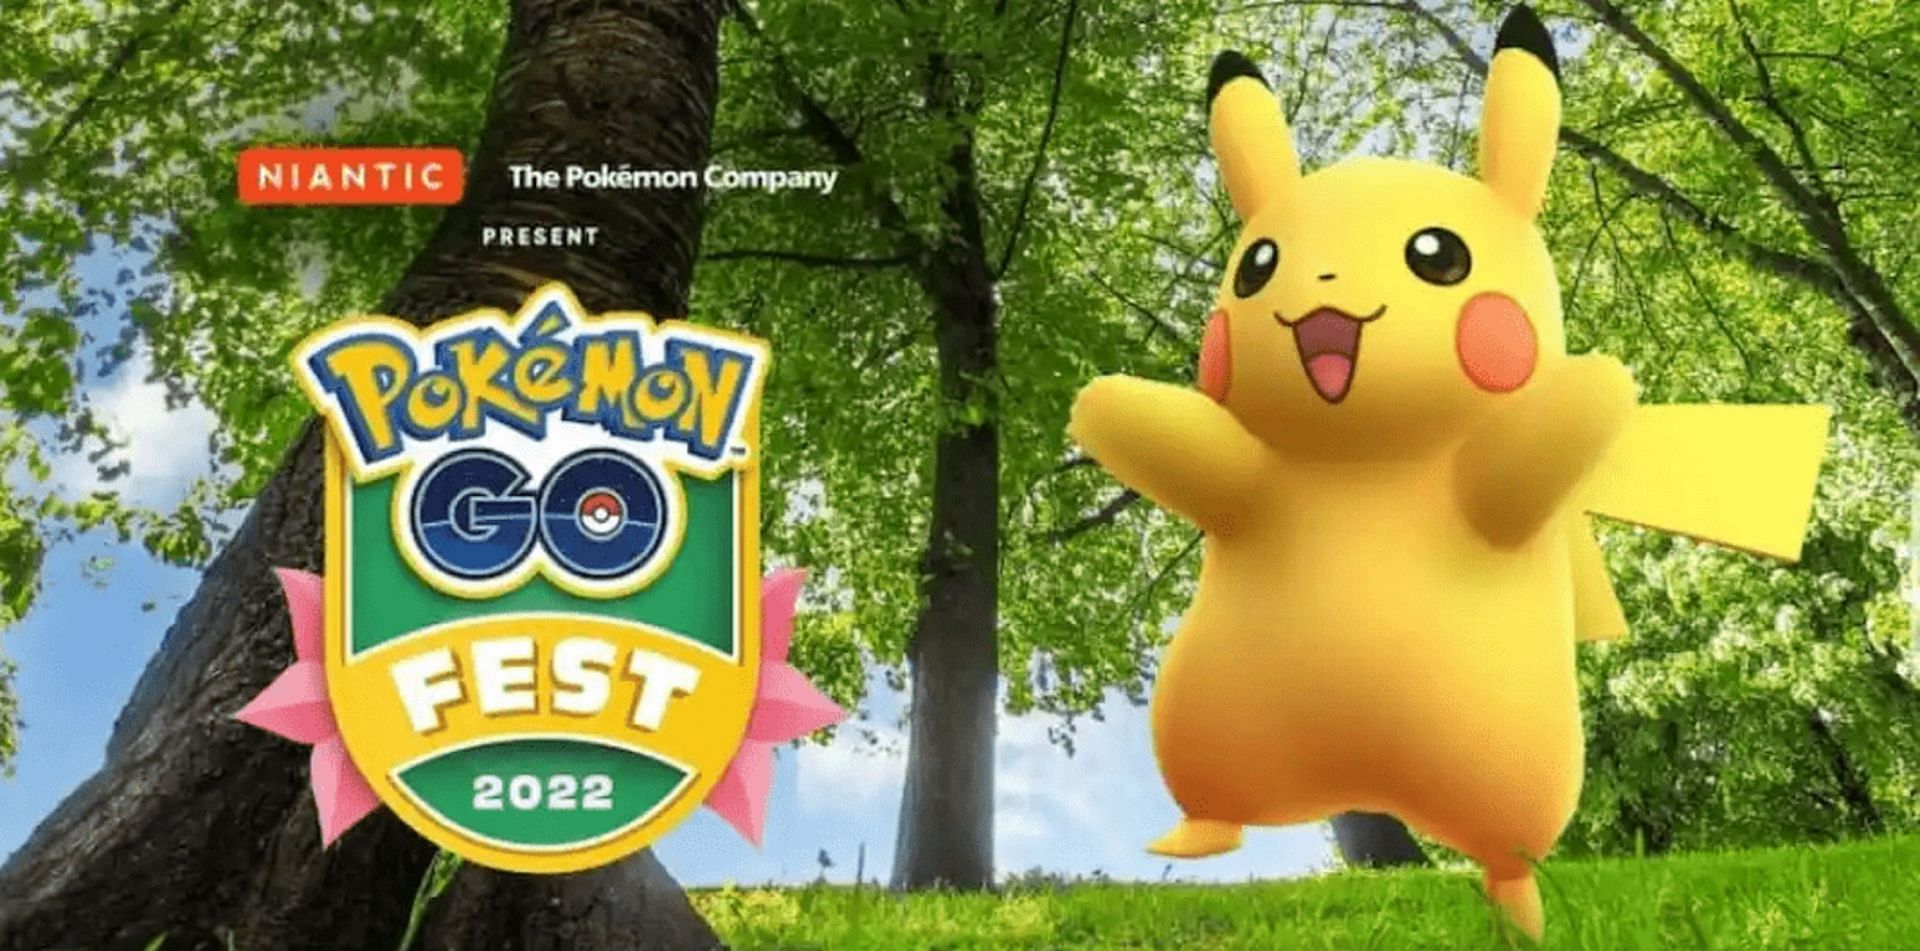 GO Fest Berlin promises to provide trainers with several exclusive benefits within the confines of Britzer Garden (Image via Niantic)